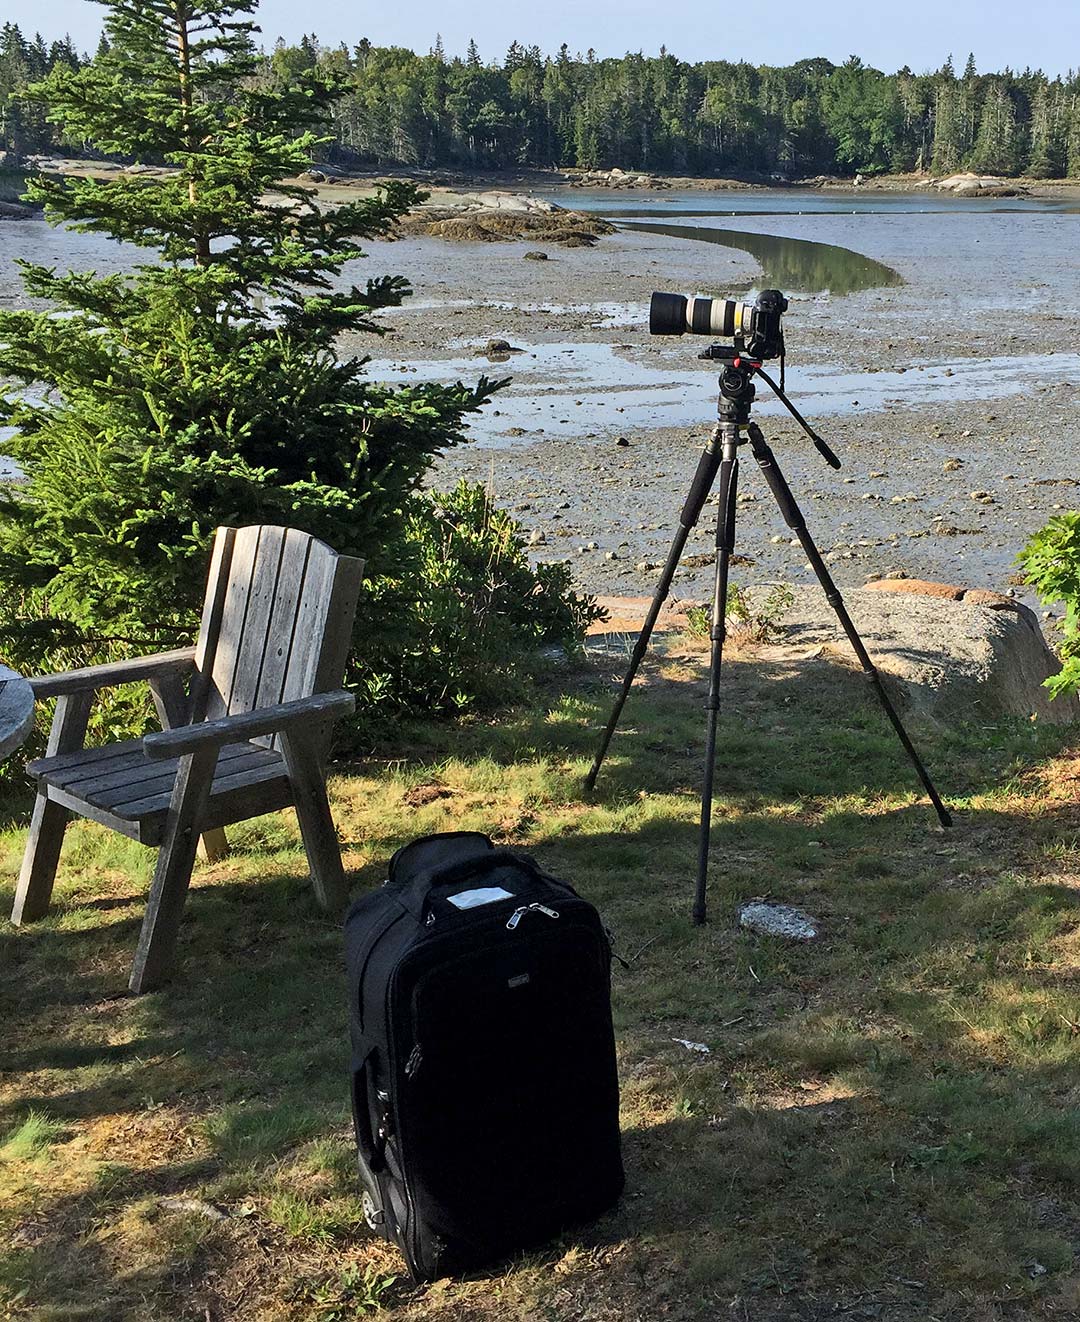 Canon 100-400mm F/4.5-5.6L IS II lens ready for action. Deer Isle, Maine. September, 2016.